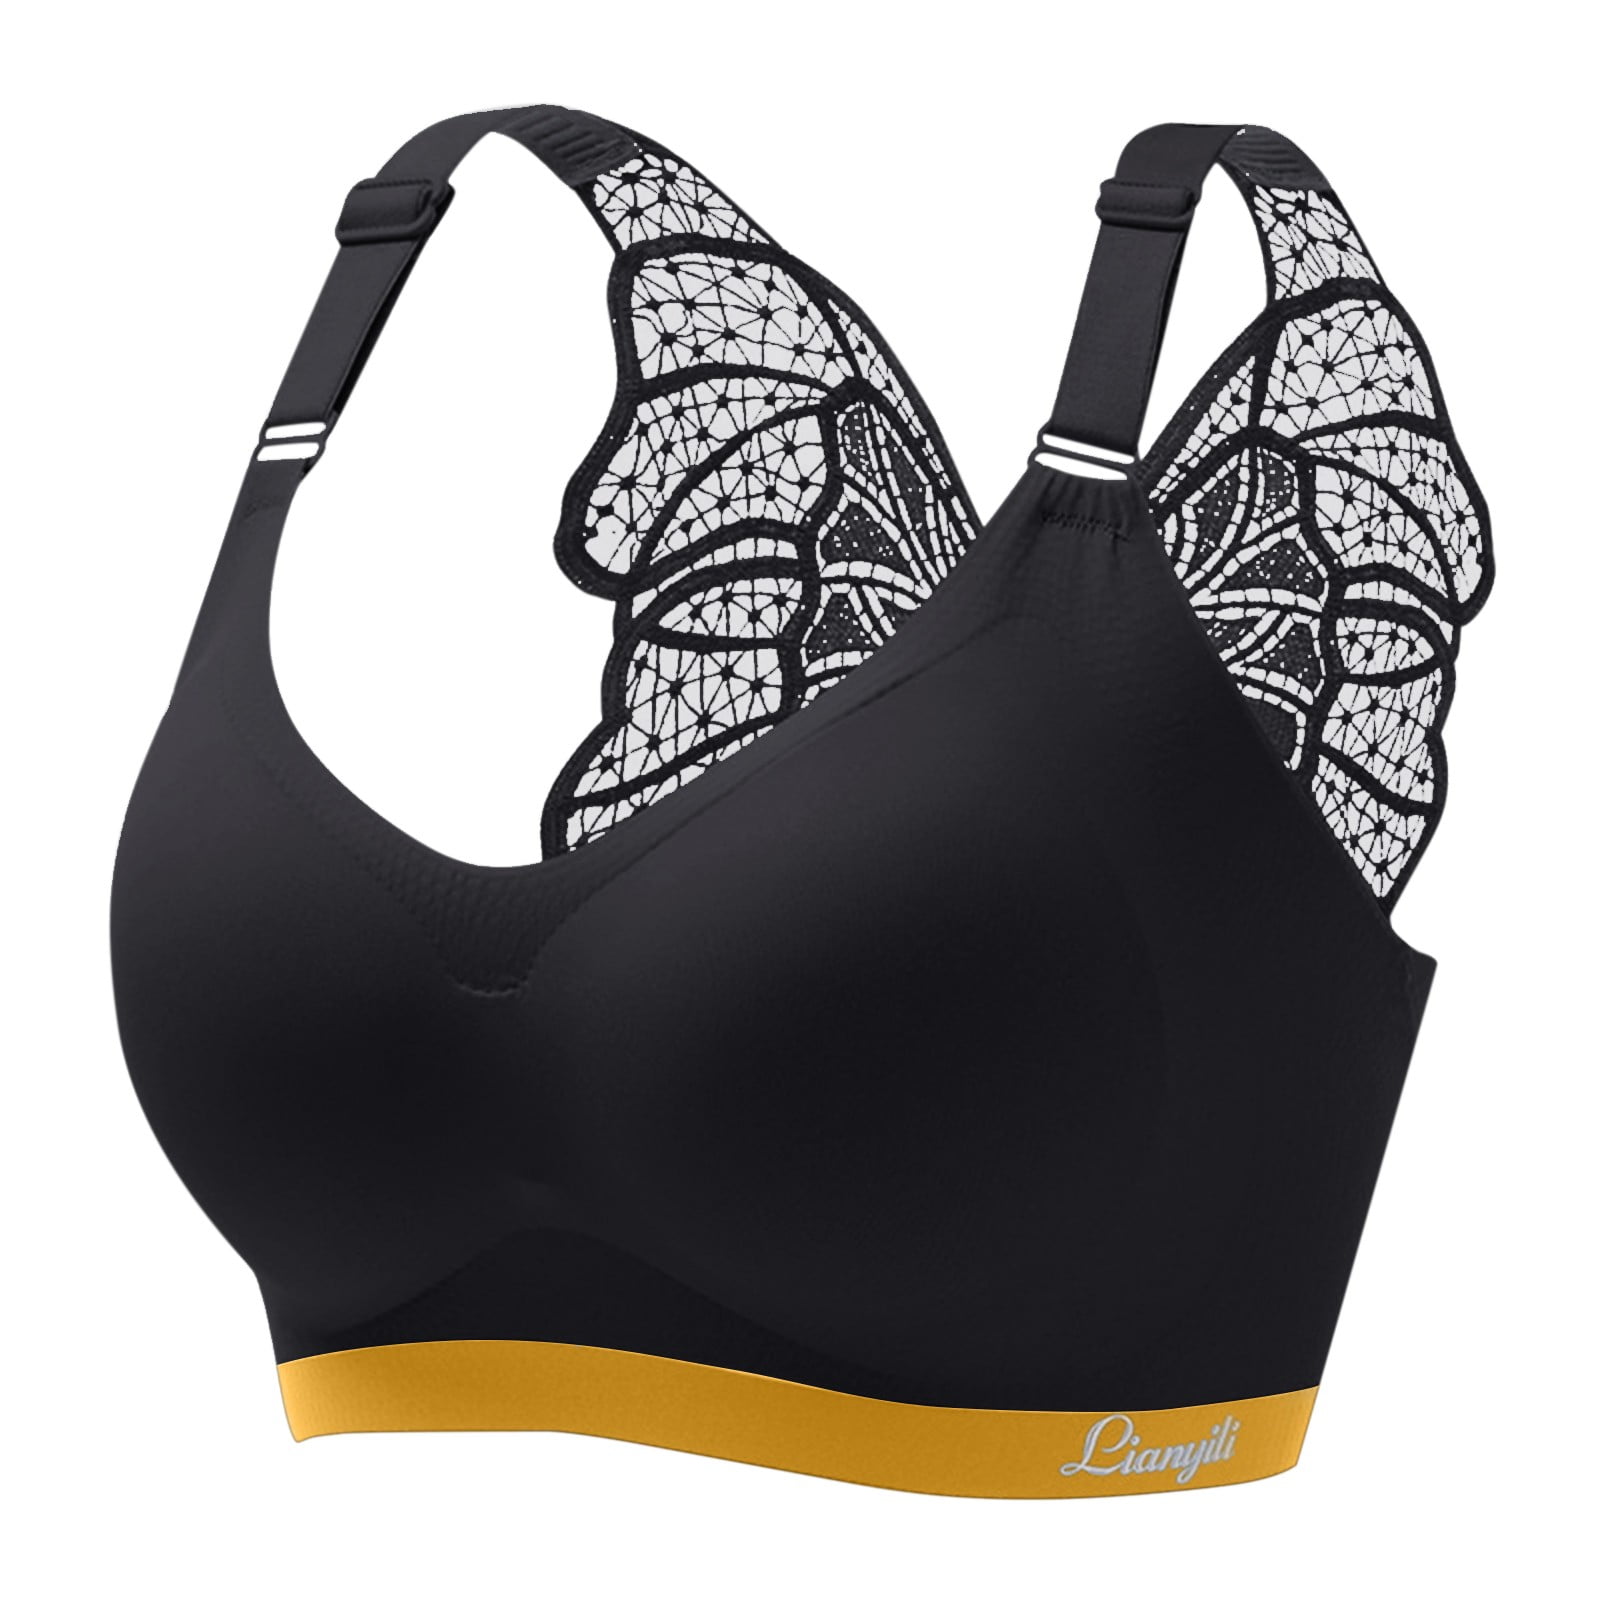 This Sports Bra is AMAZING for Fuller-Figures (And a SheFit